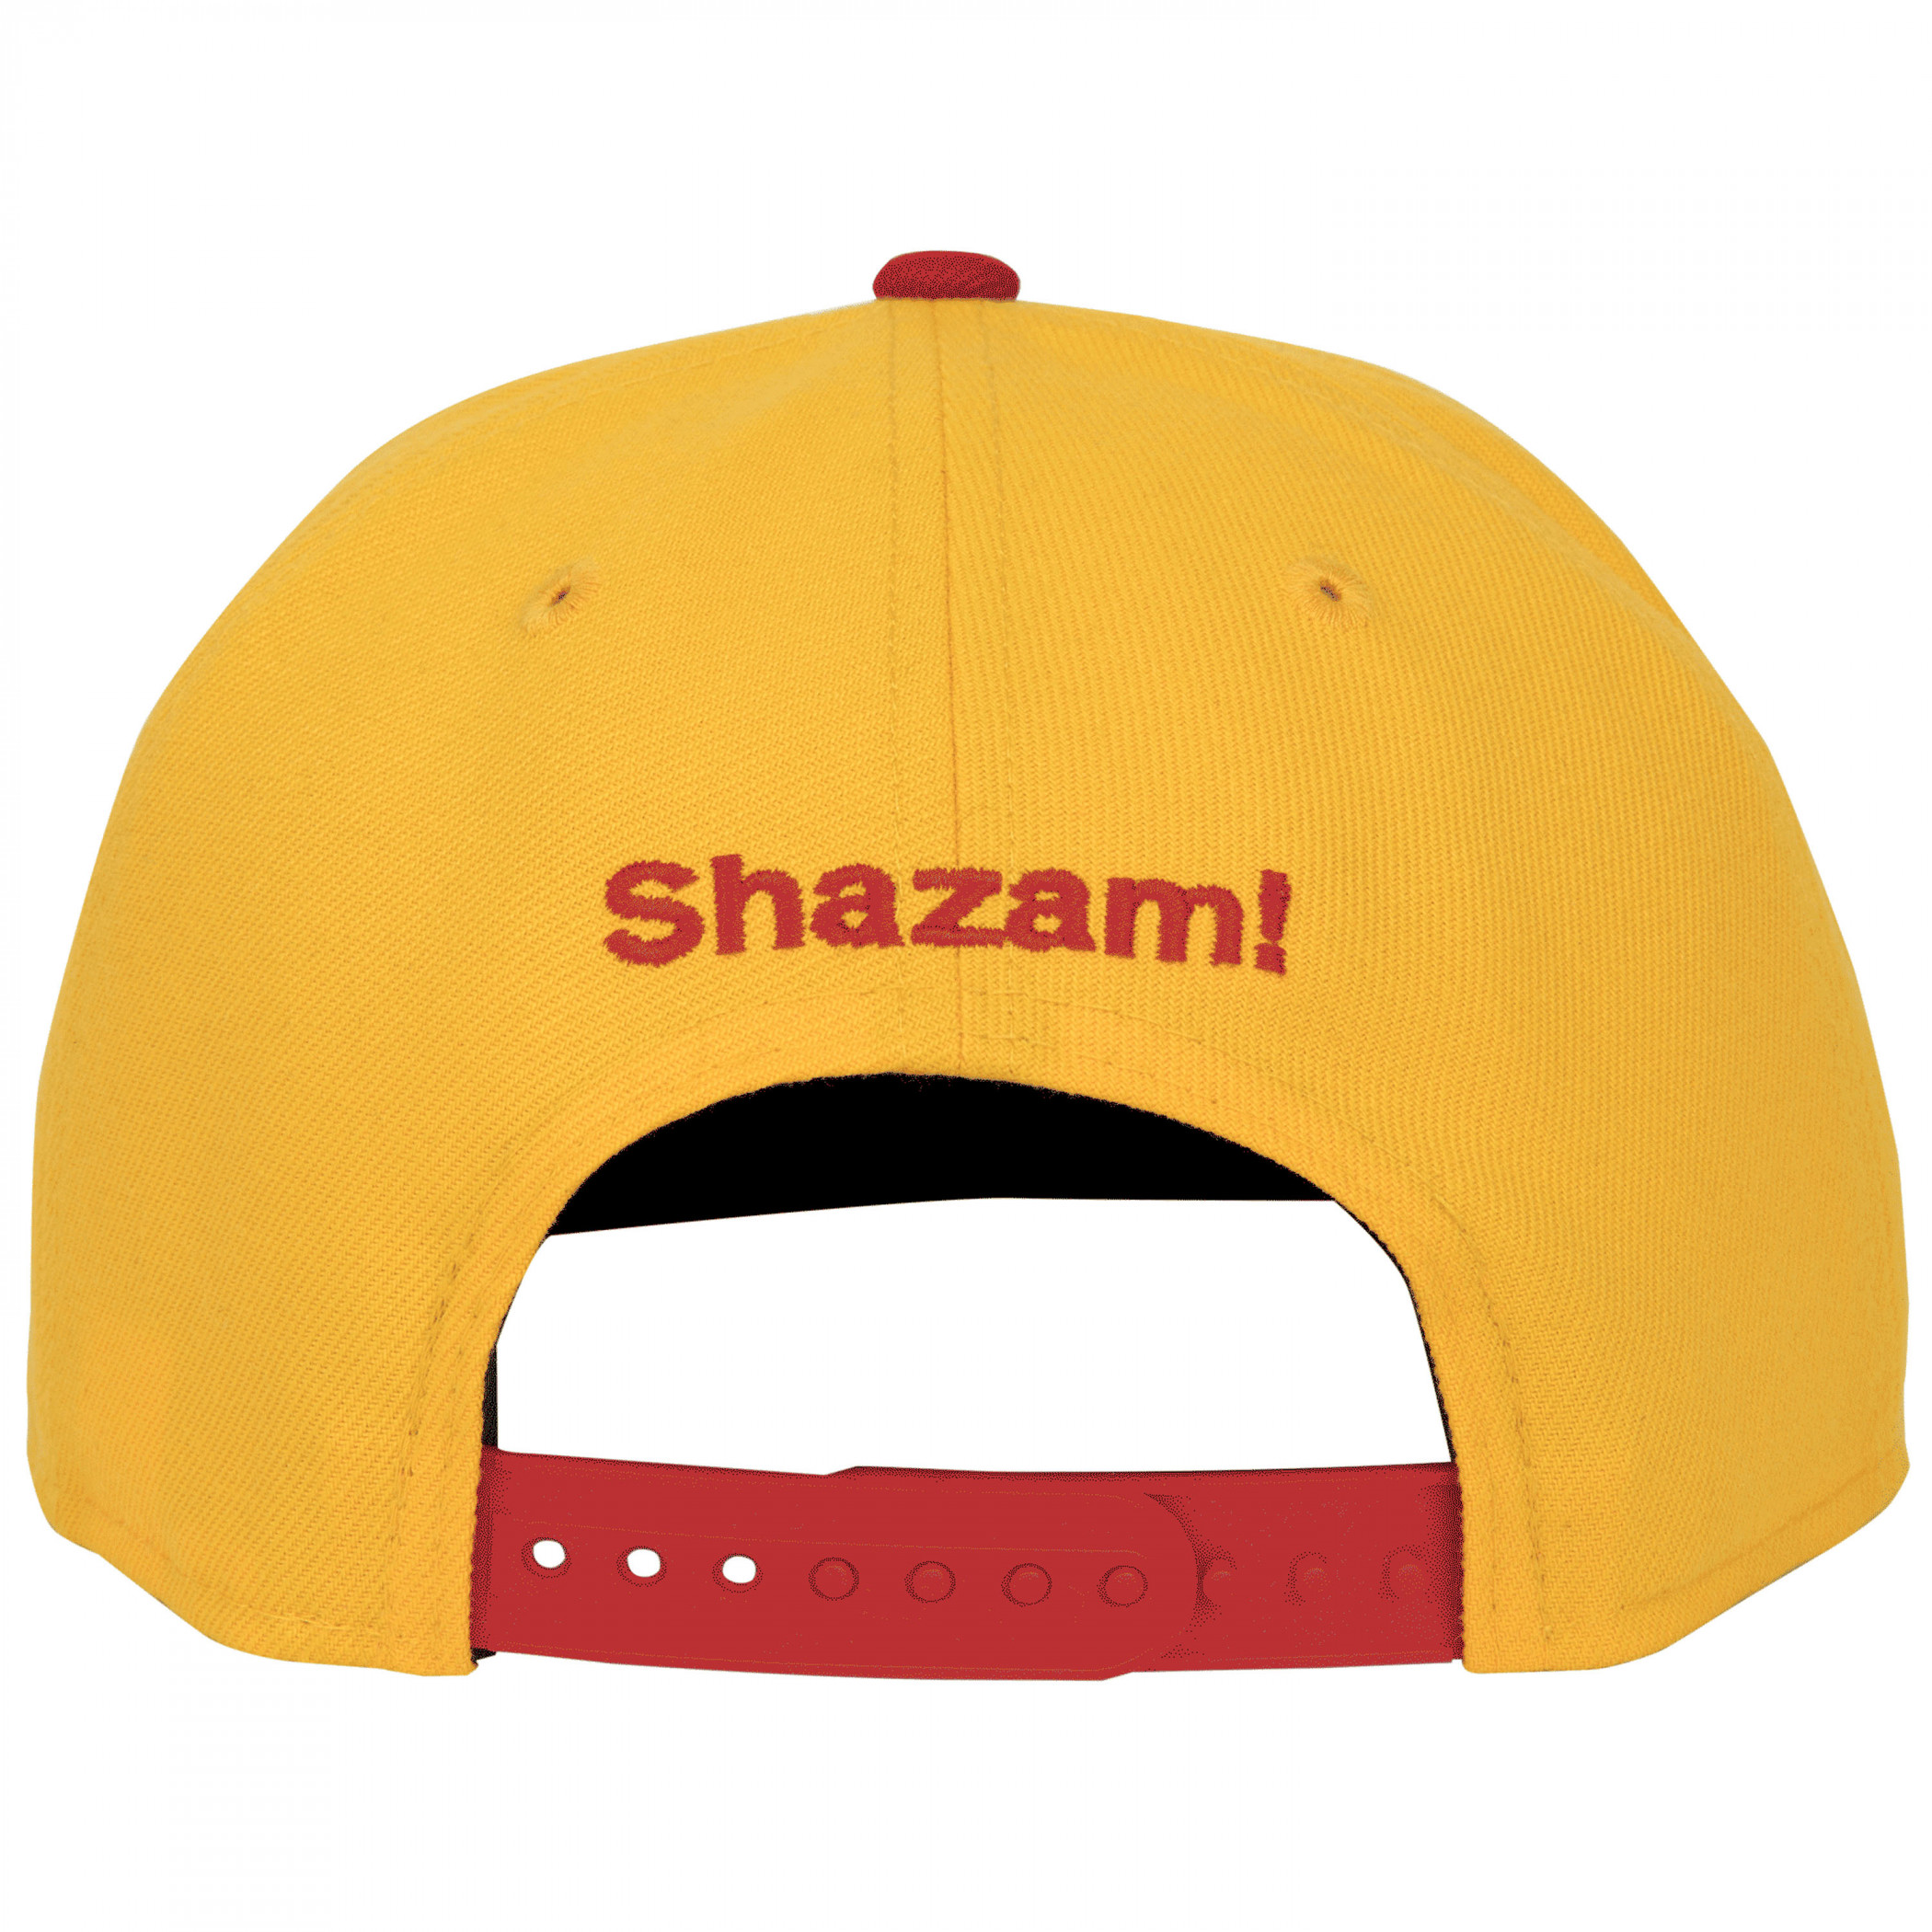 Shazam Symbol Red and Gold Colorway New Era 9Fifty Adjustable Hat